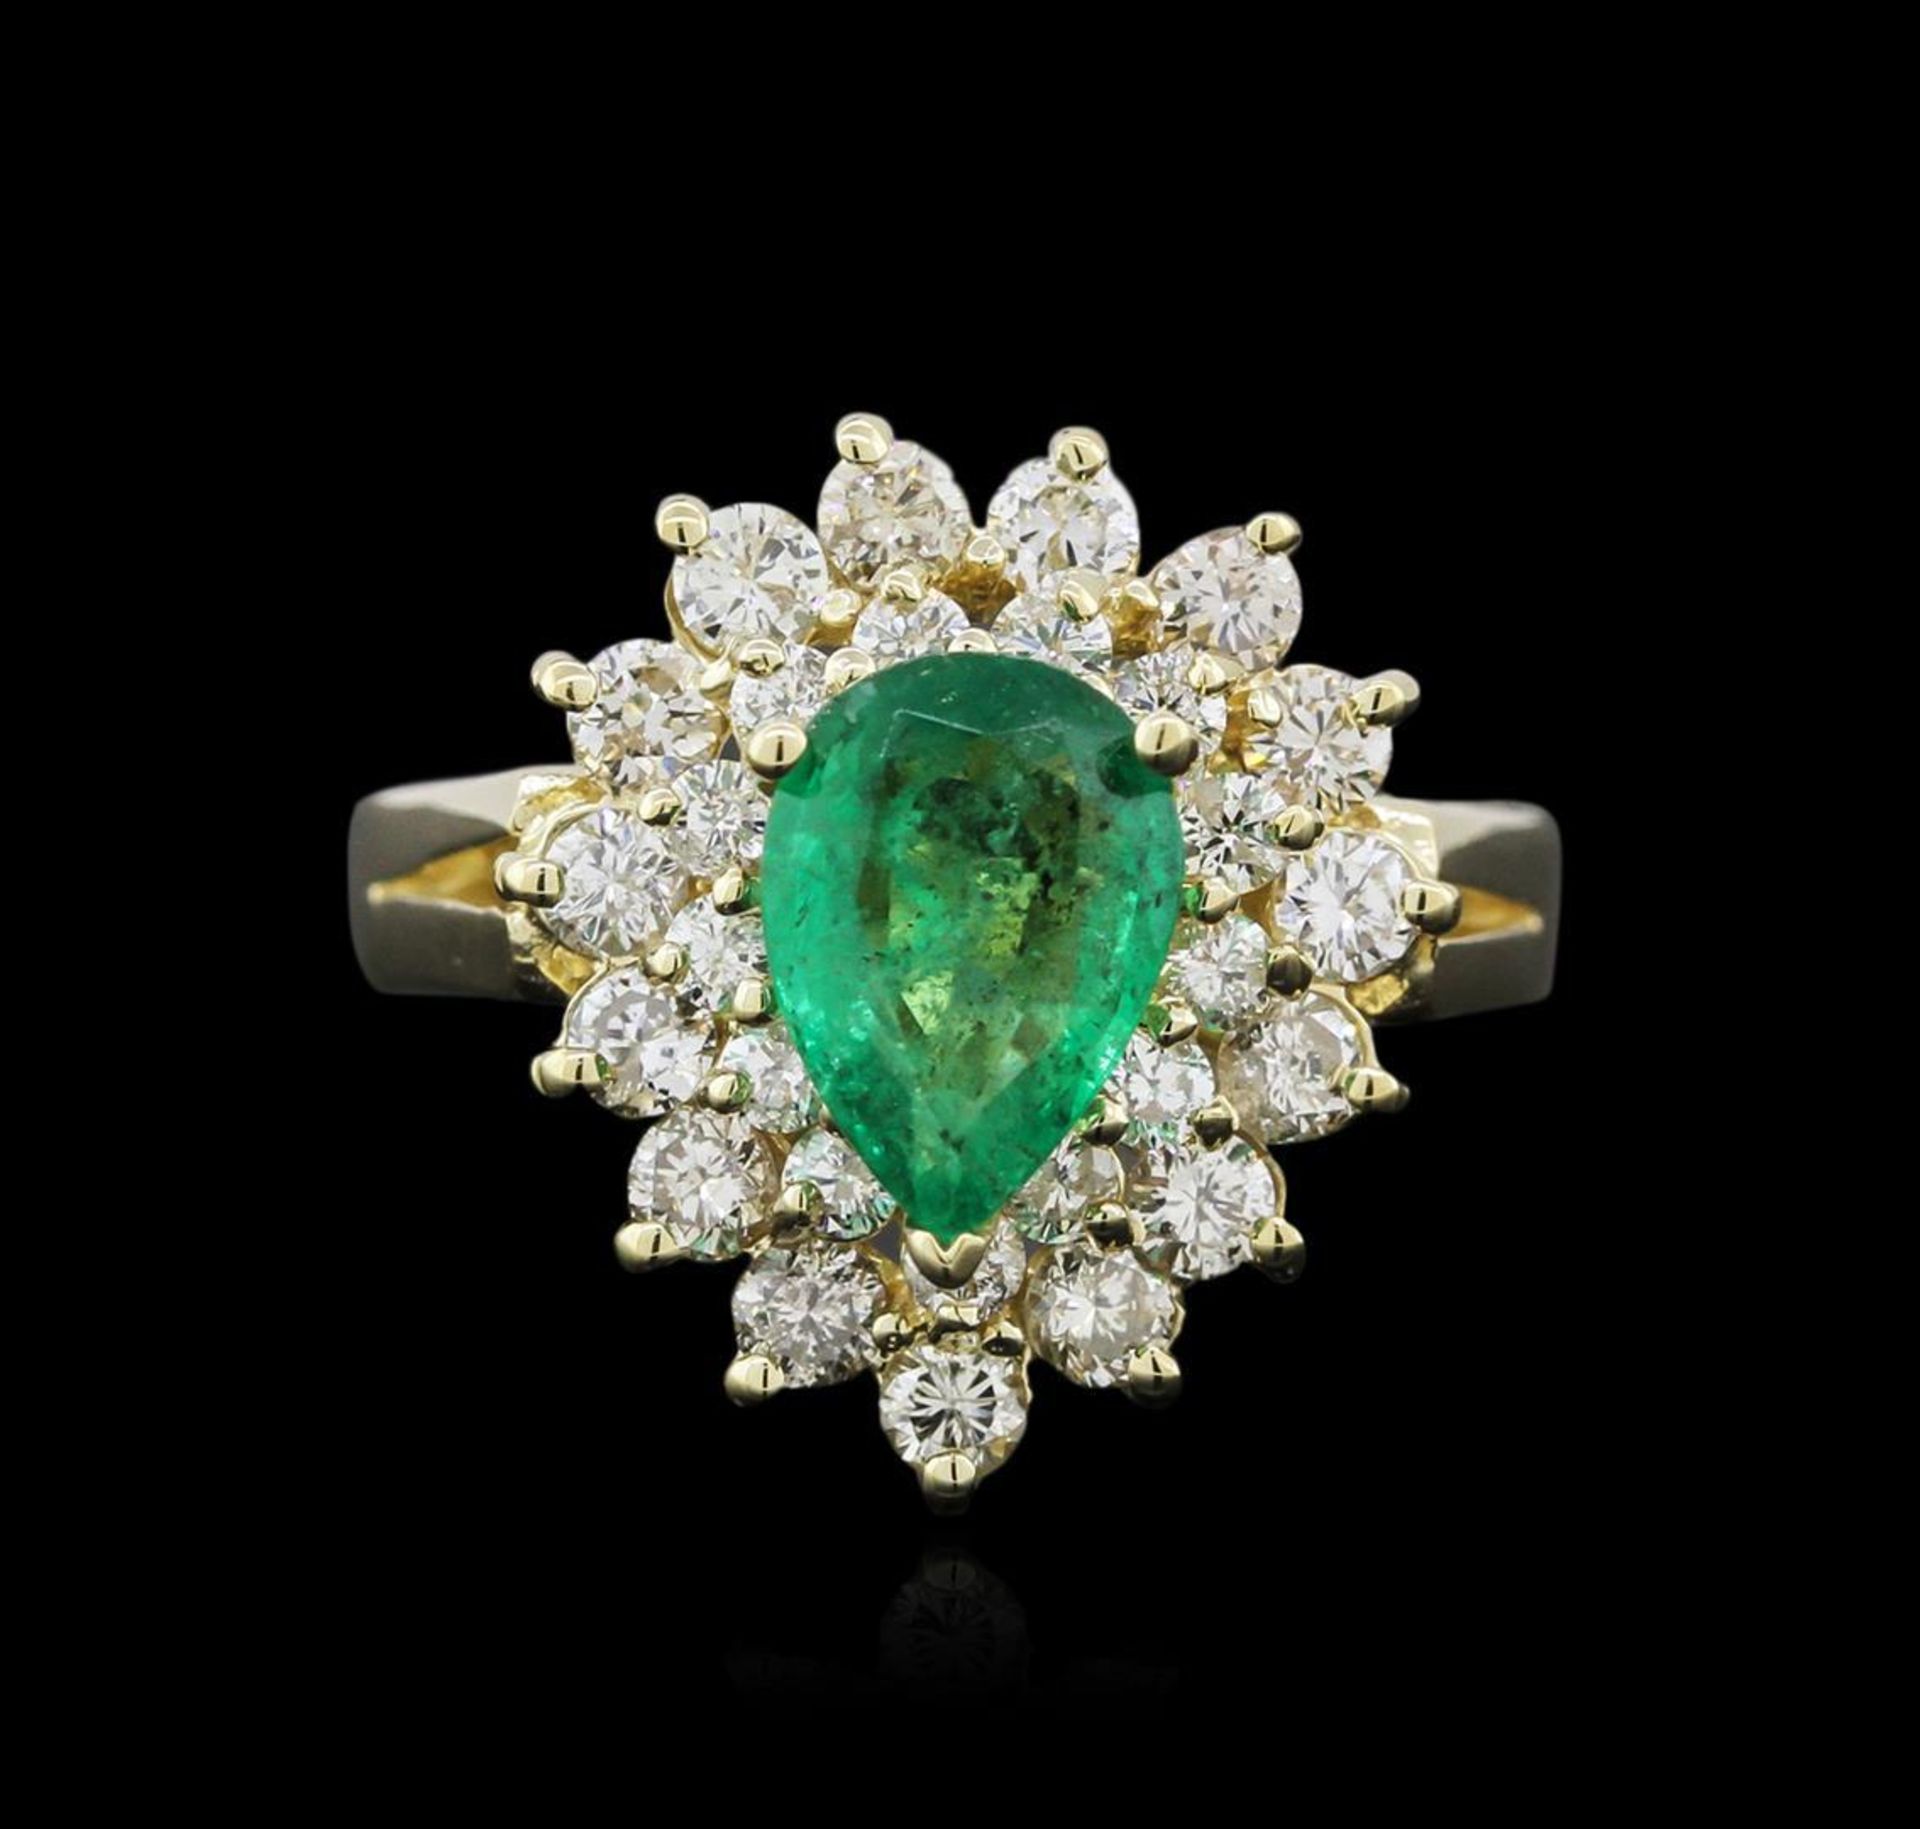 14KT Yellow Gold 2.29 ctw Emerald and Diamond Ring - Image 2 of 4